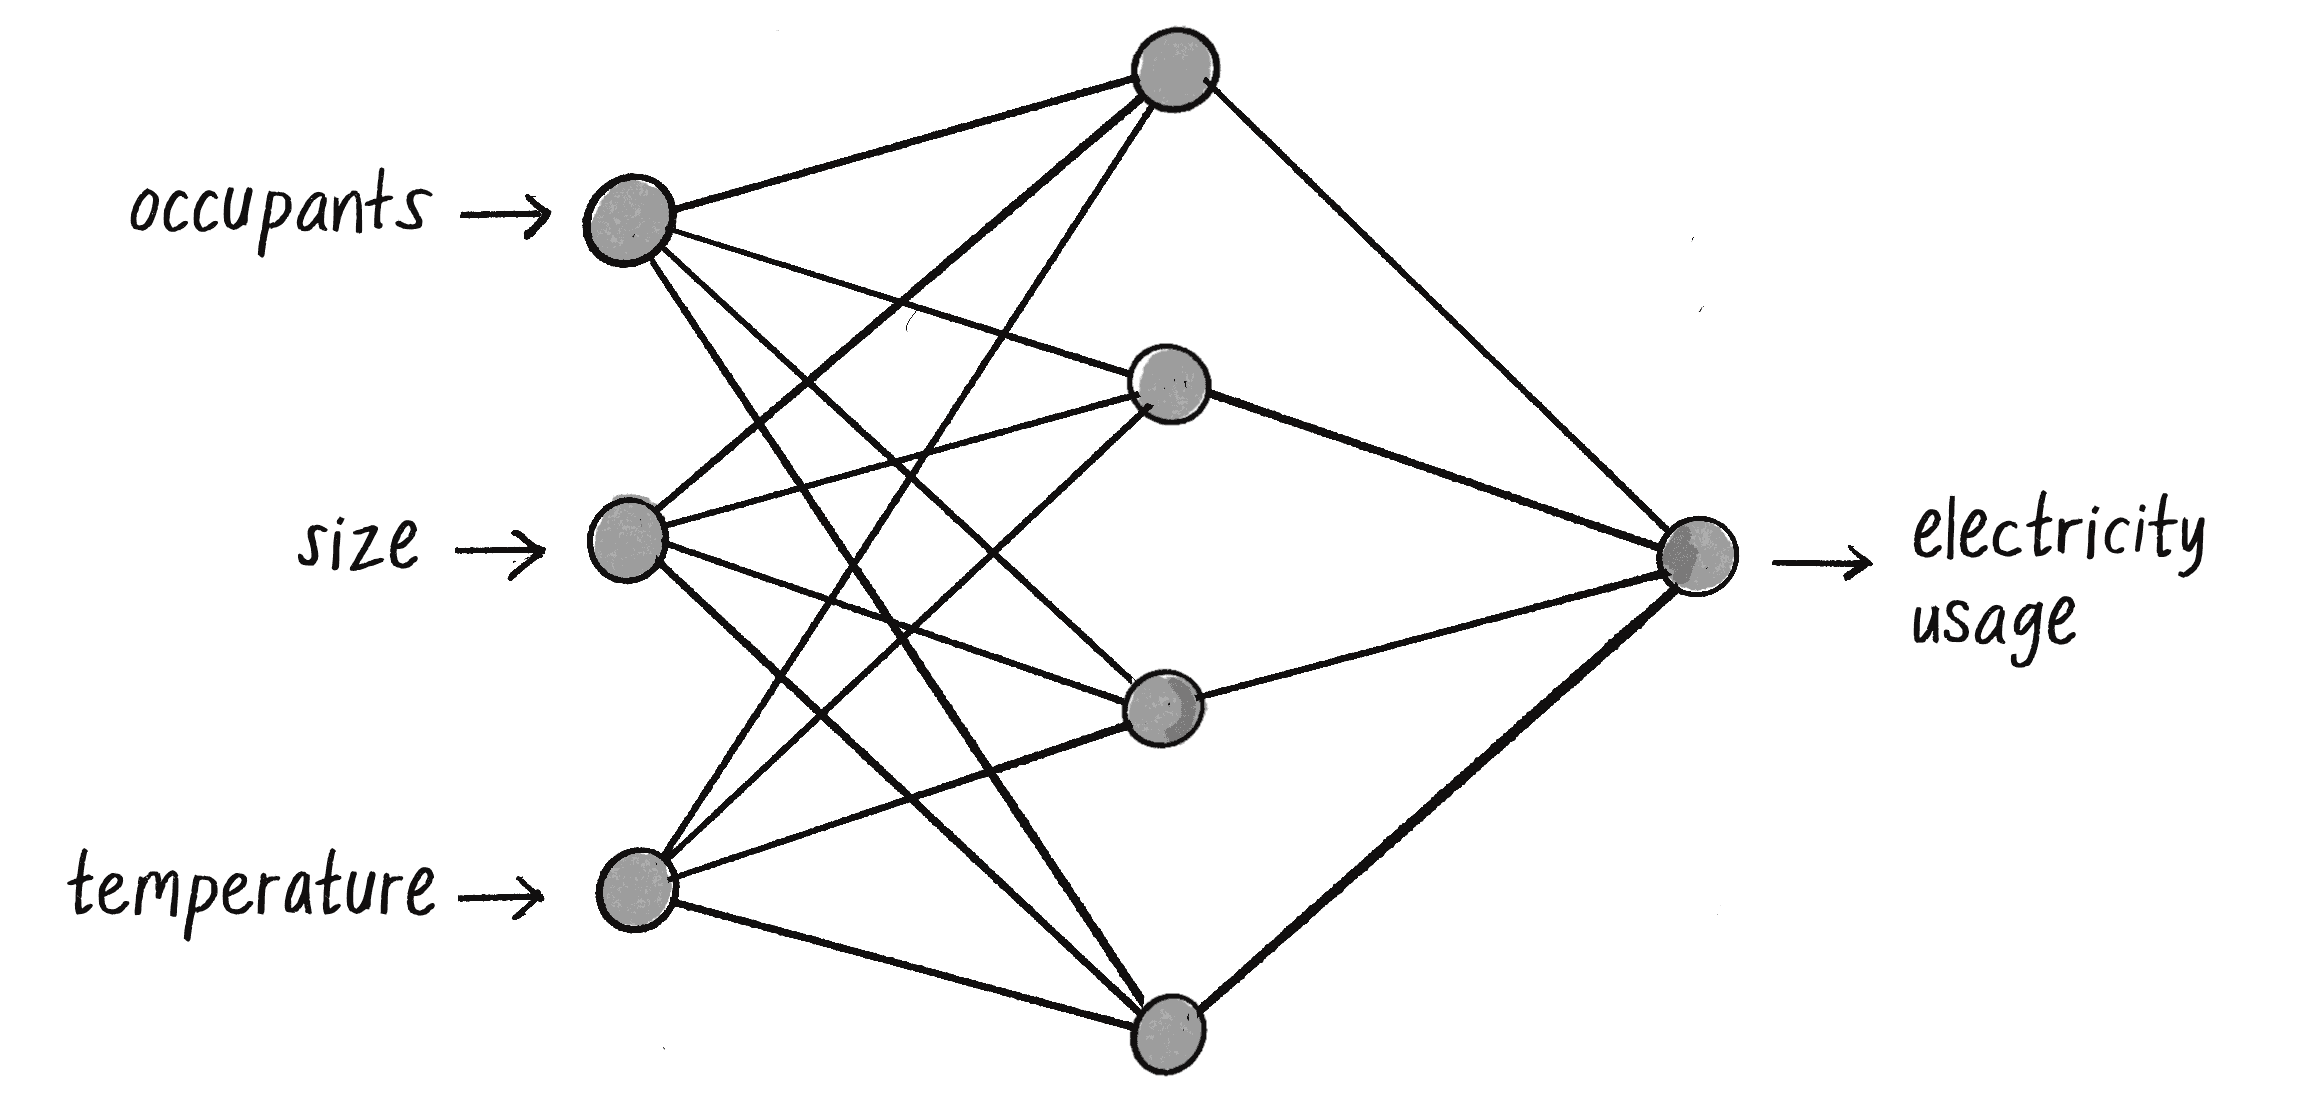 Figure 10.19: A possible network architecture for three inputs and one regression output